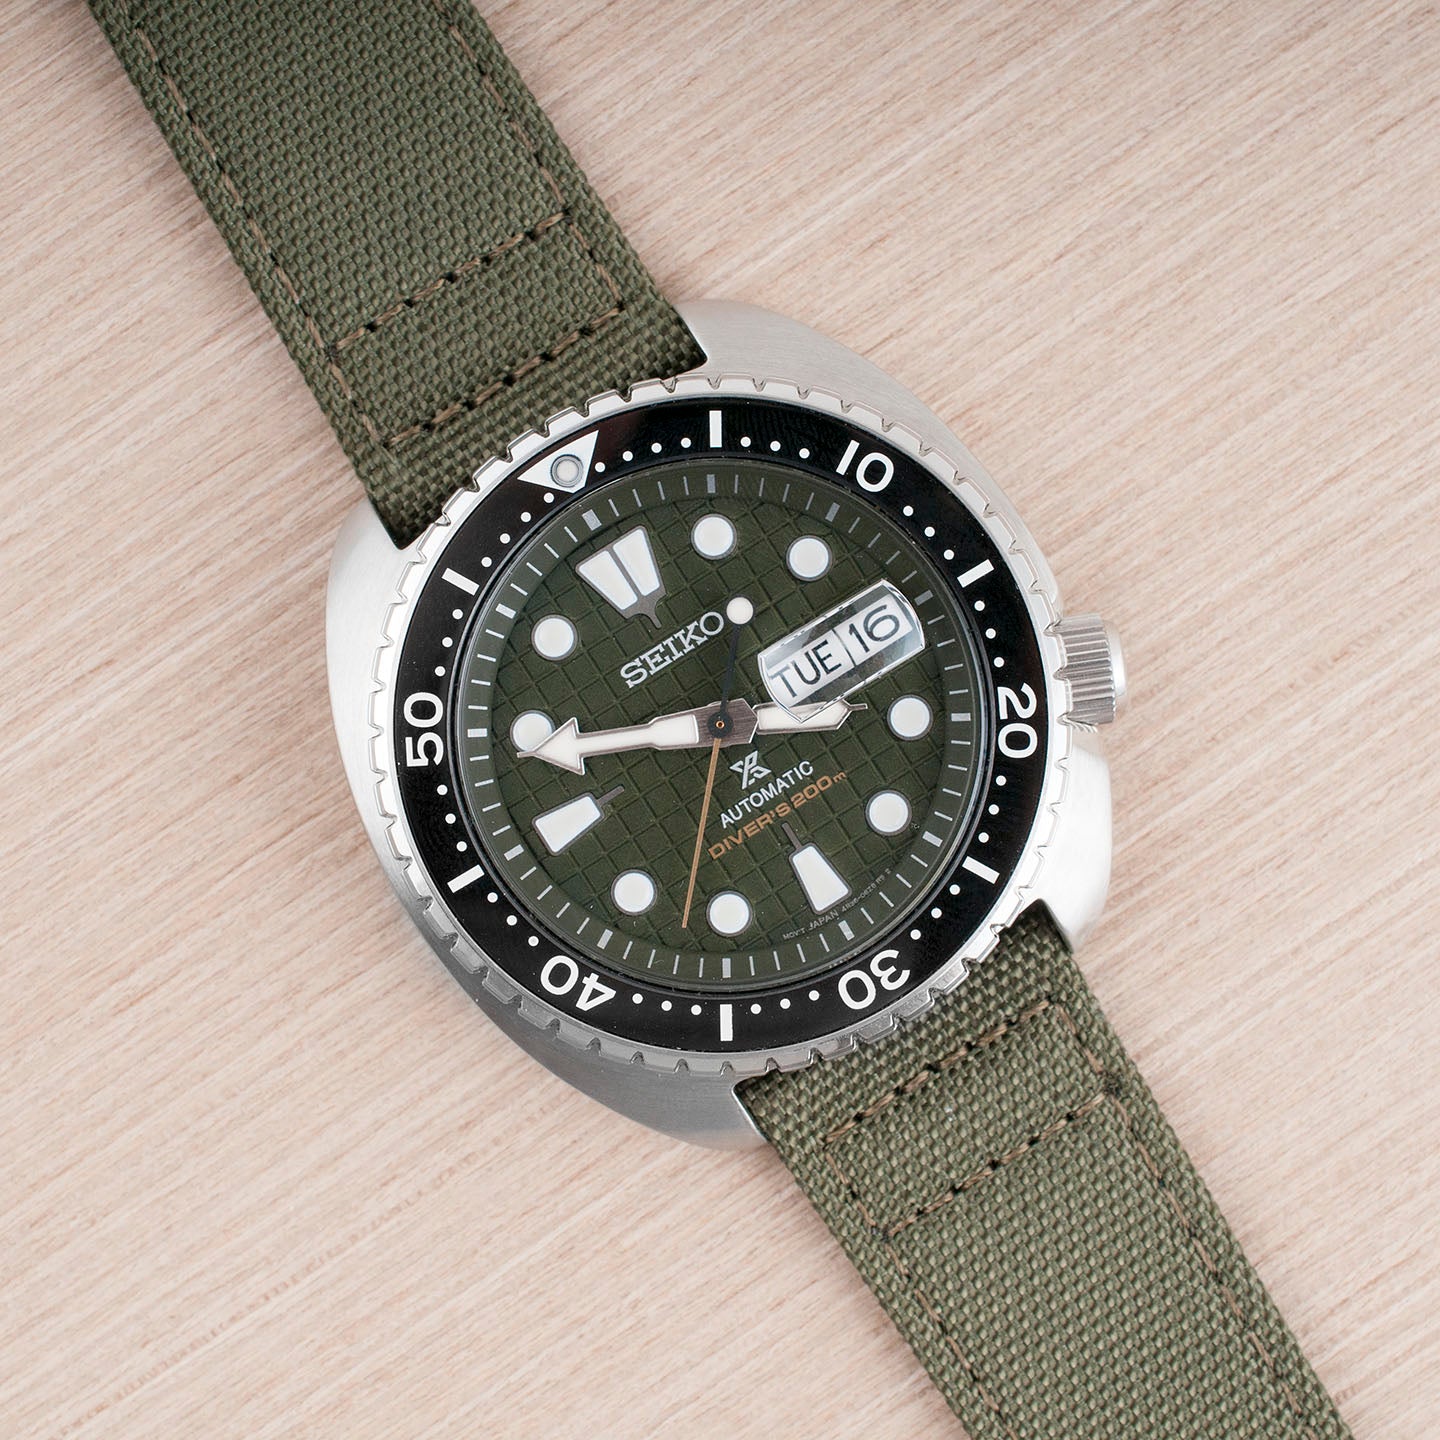 Premium Sailcloth quick release watch strap band replacement 19mm, 20mm, 21mm, 22mm green OD seiko king turtle grenade srp303